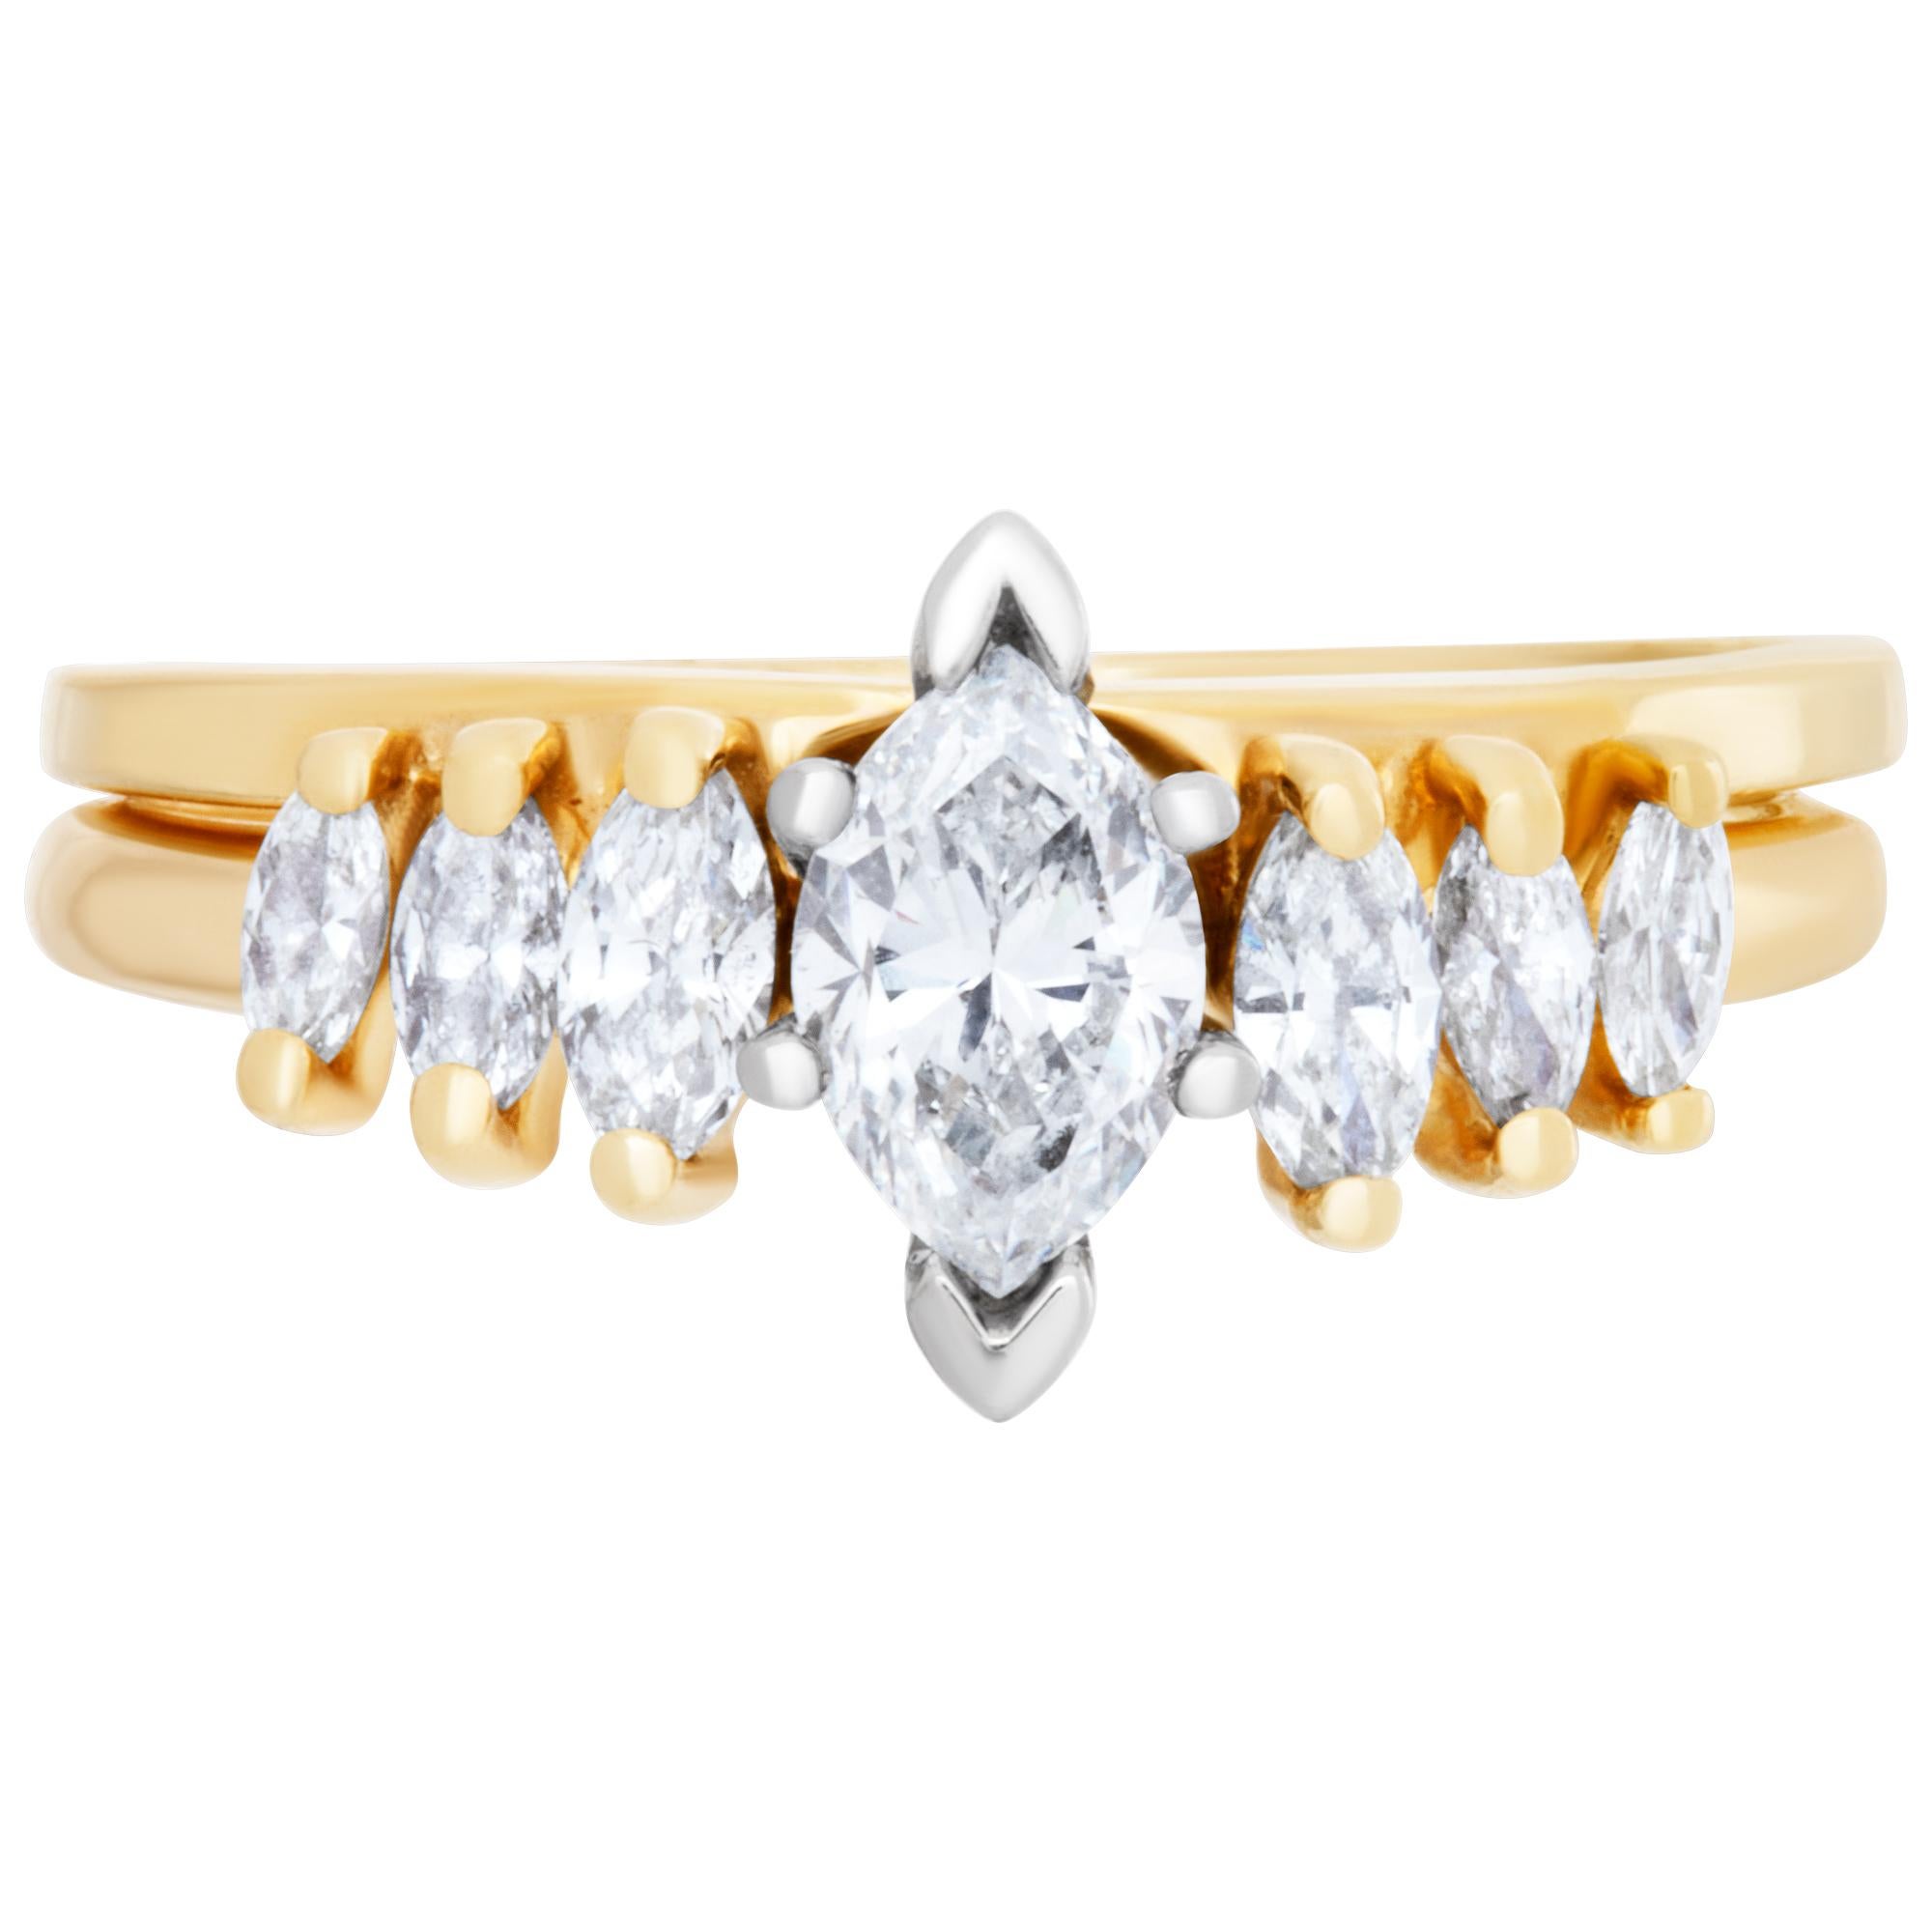 Diamond ring in 14k yellow gold with 0.50 cts in marquise diamonds (G Color SI-1 Clarity) w/ matching band. Size 6.5.This Diamond ring is currently size 6.5 and some items can be sized up or down, please ask! It weighs 2.7 pennyweights and is 14k.